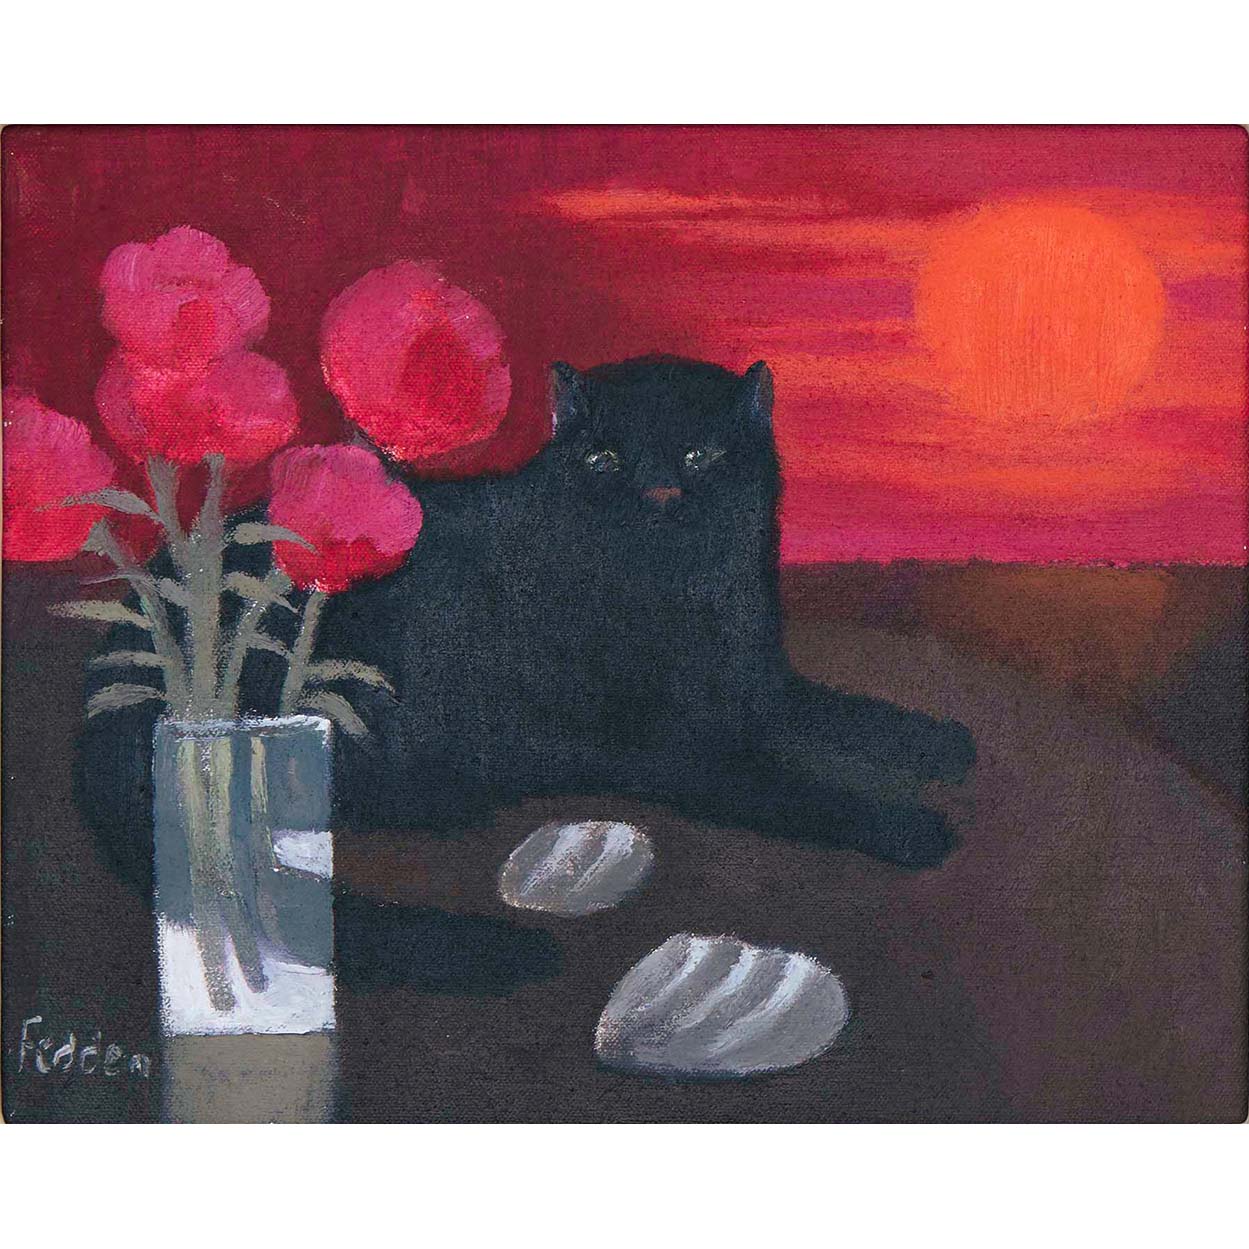 MARY FEDDEN. CAT IN THE SUNSET. 2001